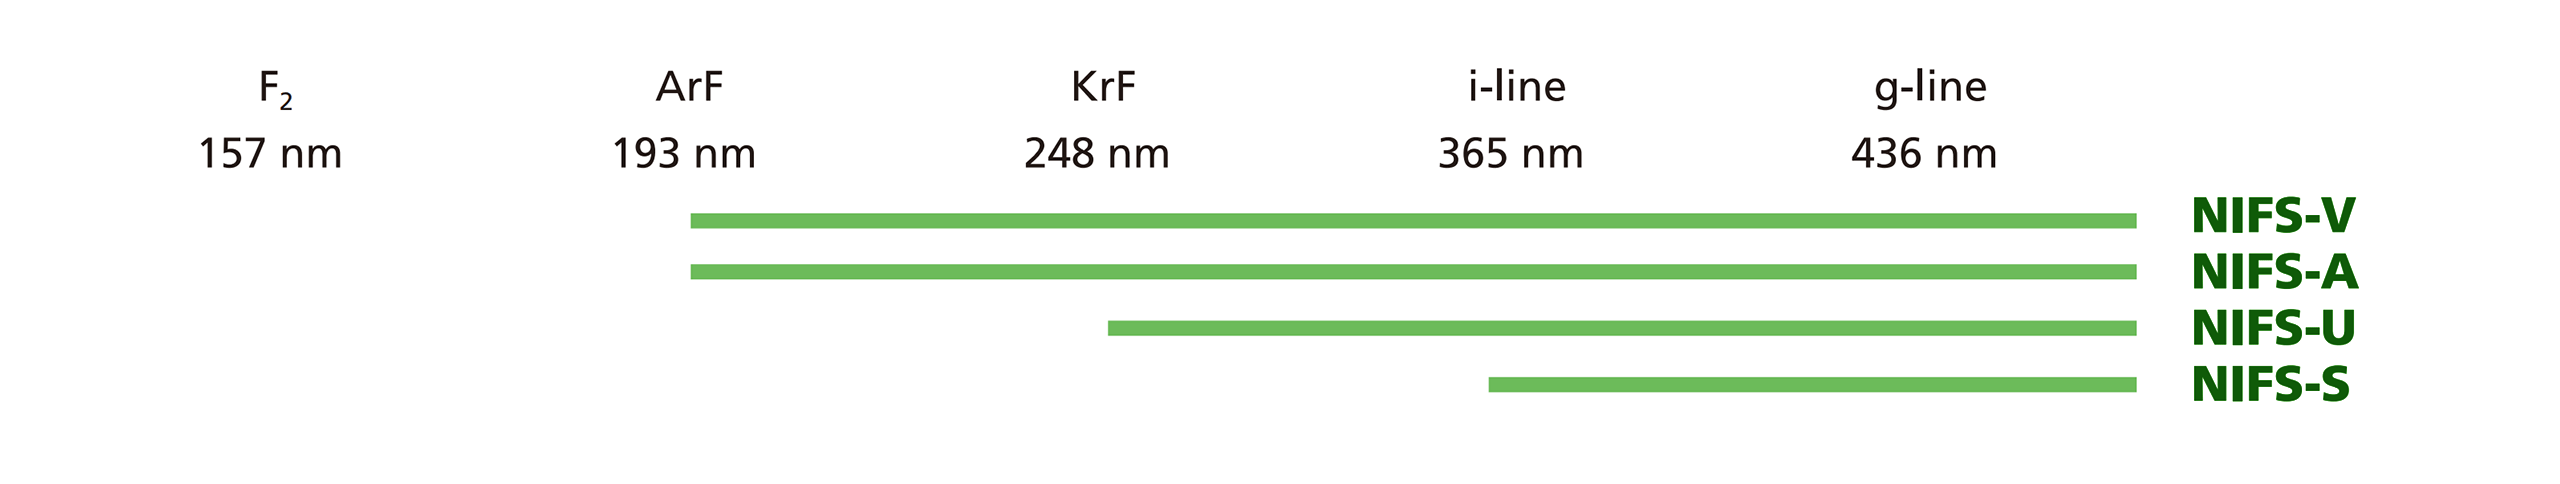 The transmittance range for NIFS-V and NIFS-A is up to ArF (193 nm). The transmittance range for NIFS-U is up to KrF (248 nm). The transmittance range for NIFS-S is the i-line (365 nm) or visible light.